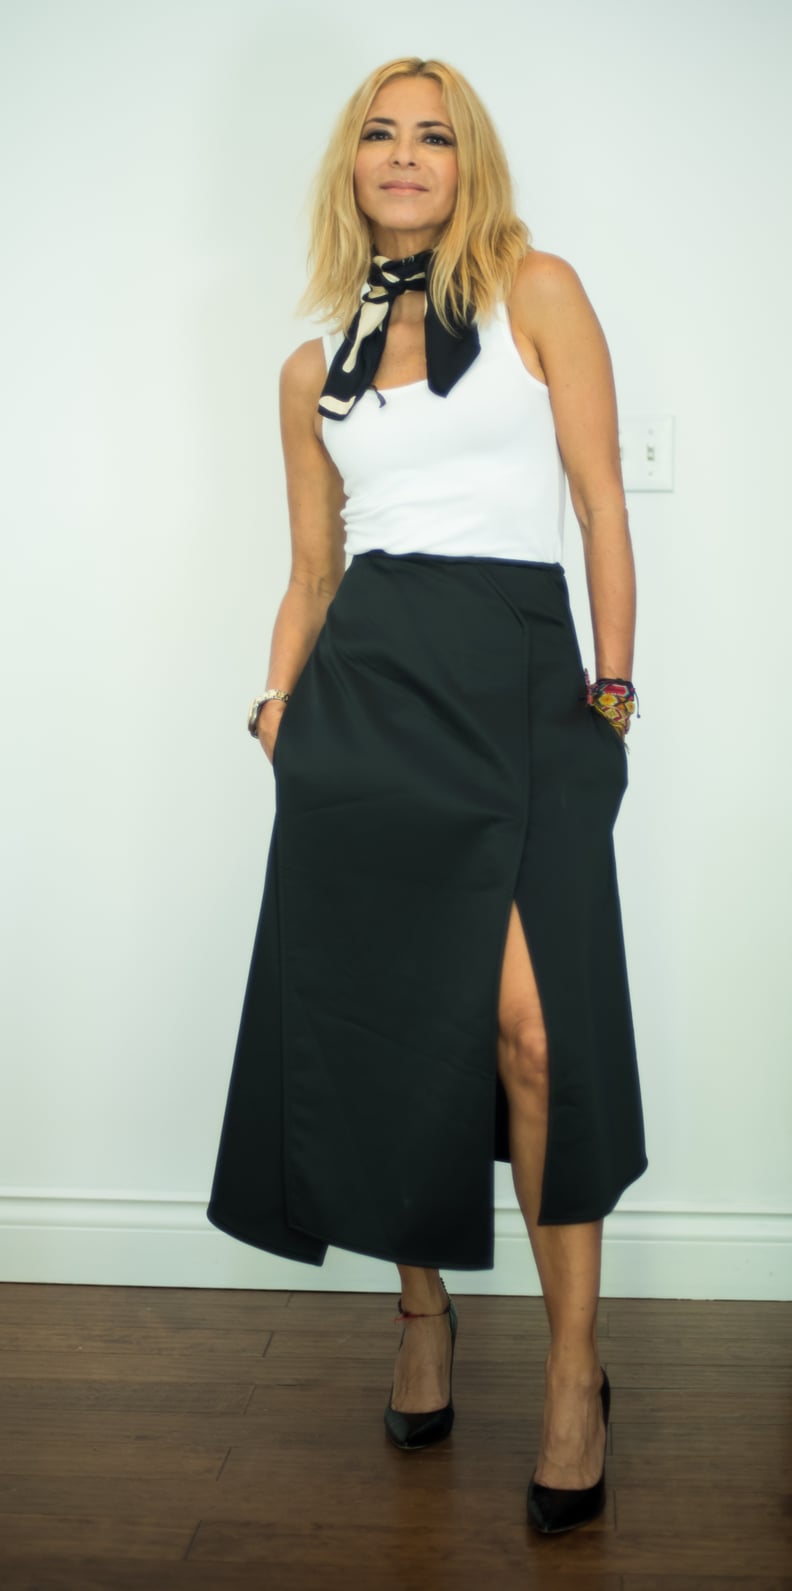 With a Midi Skirt, a Handkerchief, and Black Pumps